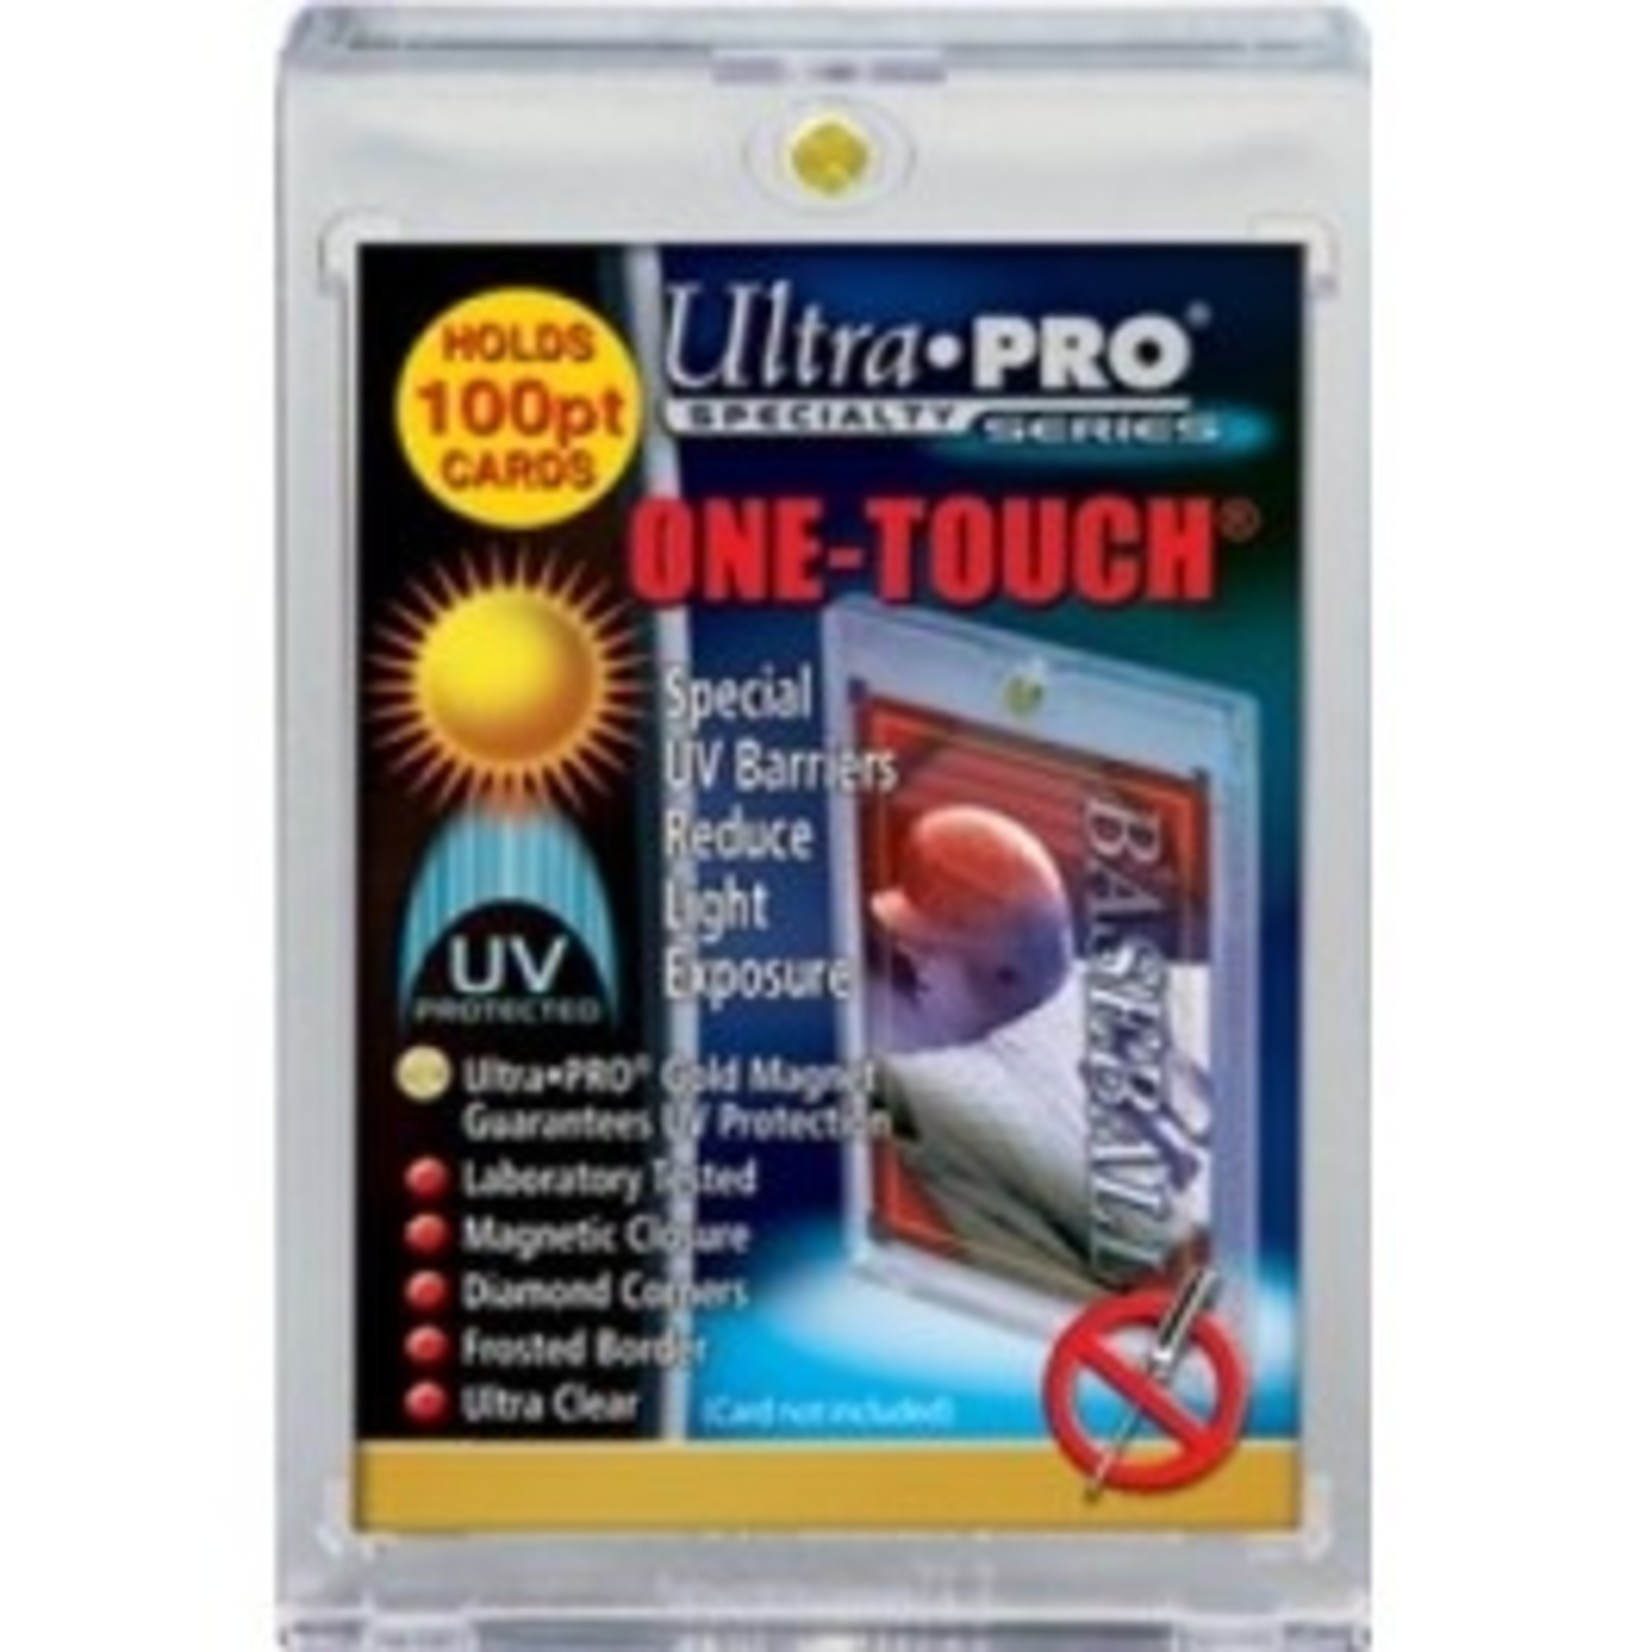 Ultra Pro ONE-TOUCH 3x5 UV 100pt